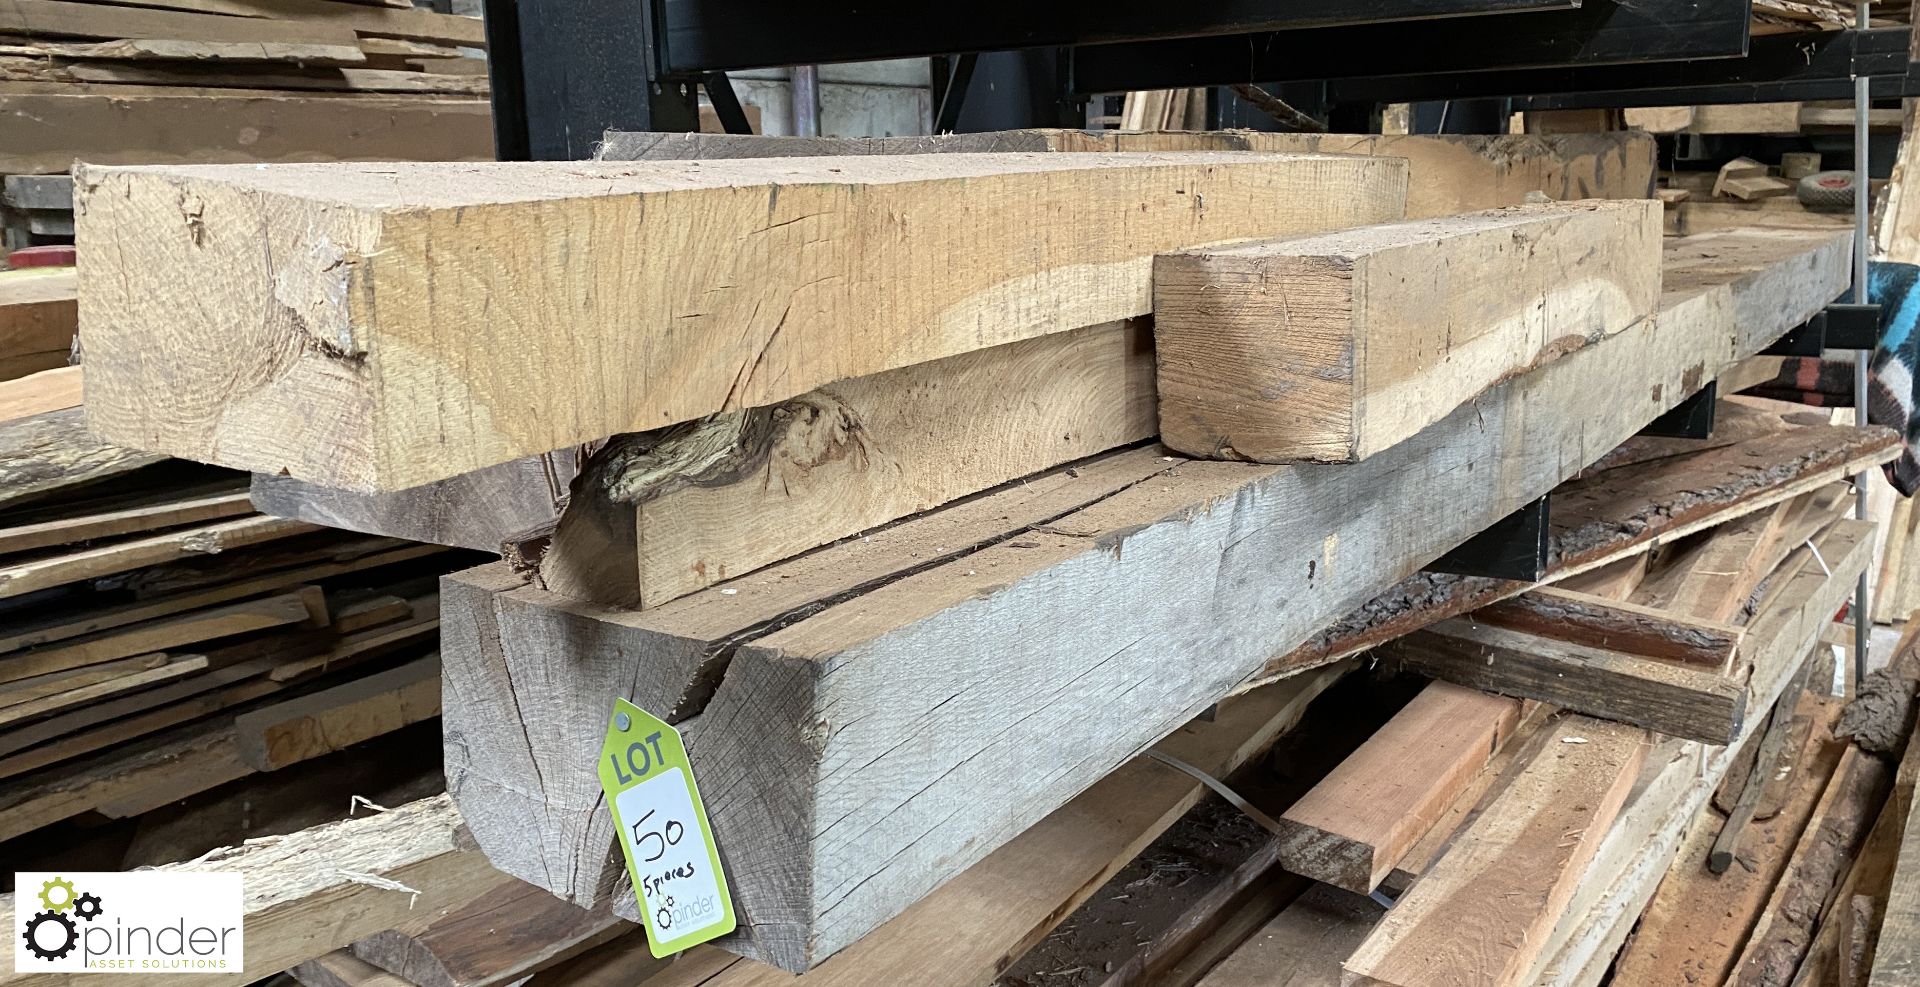 Air dried Oak Beam, 4300mm x 260mm x 150mm, Oak Beam 2460mm x 145mm x 110mm and 3 various Off Cuts - Image 2 of 6